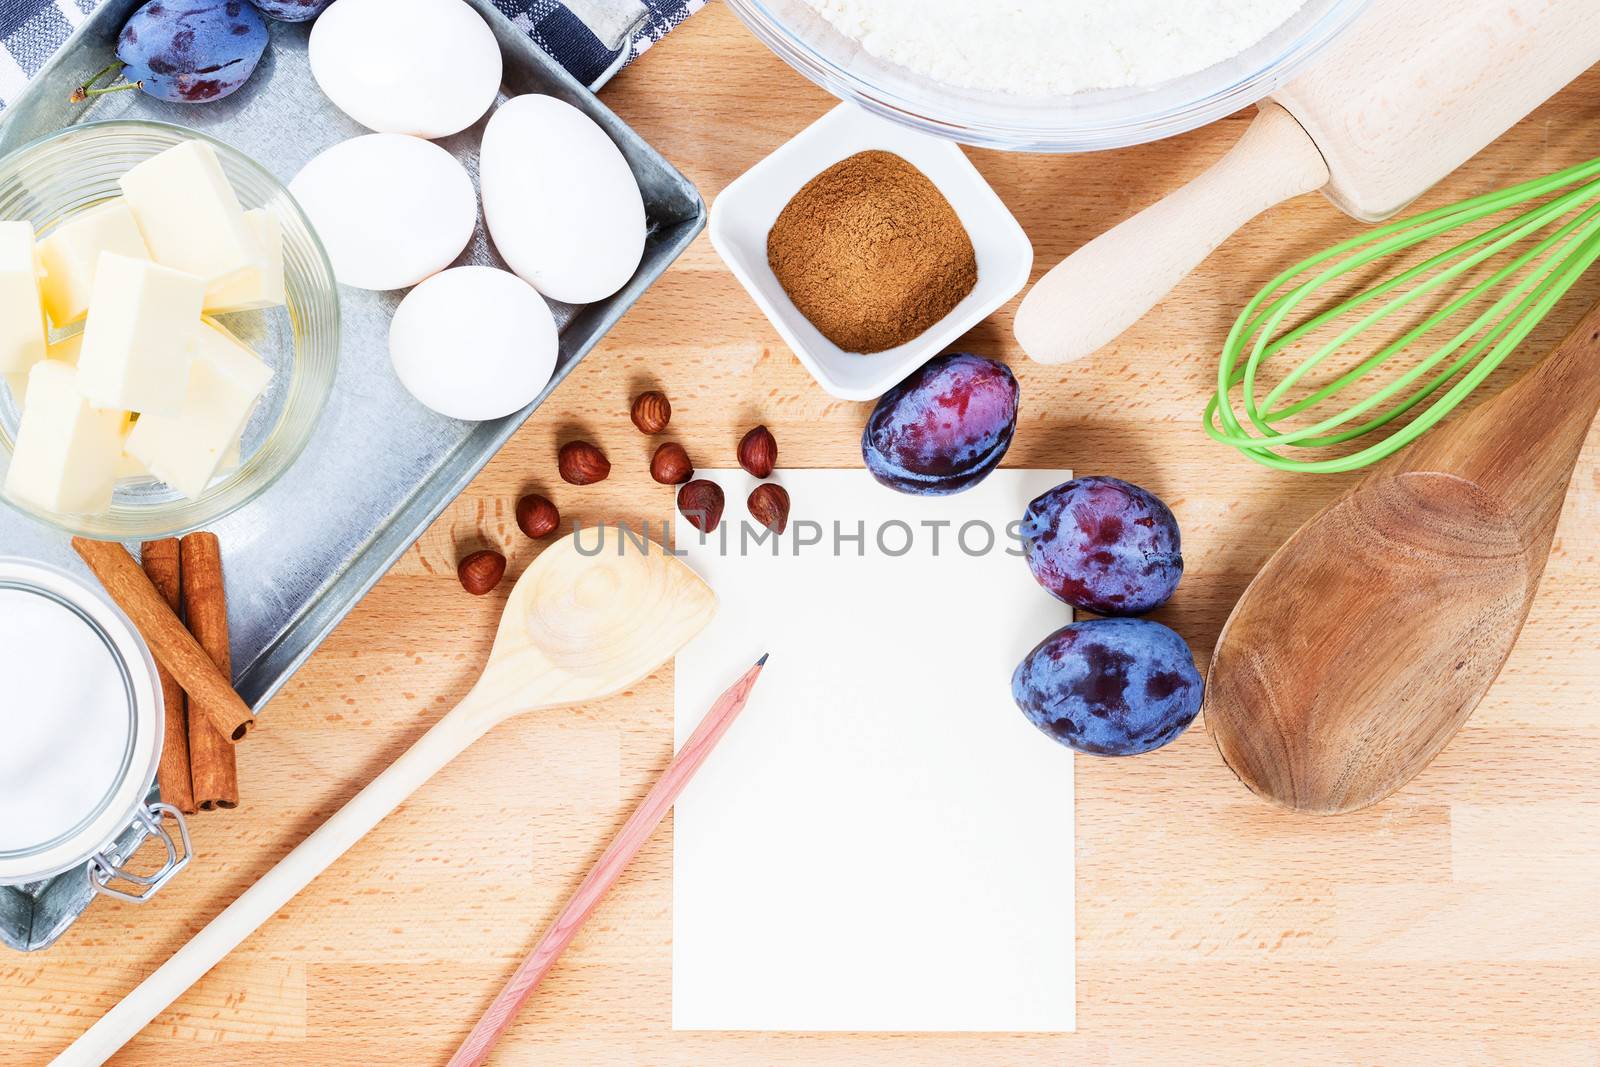 writing a recipe for plum cake by RobStark